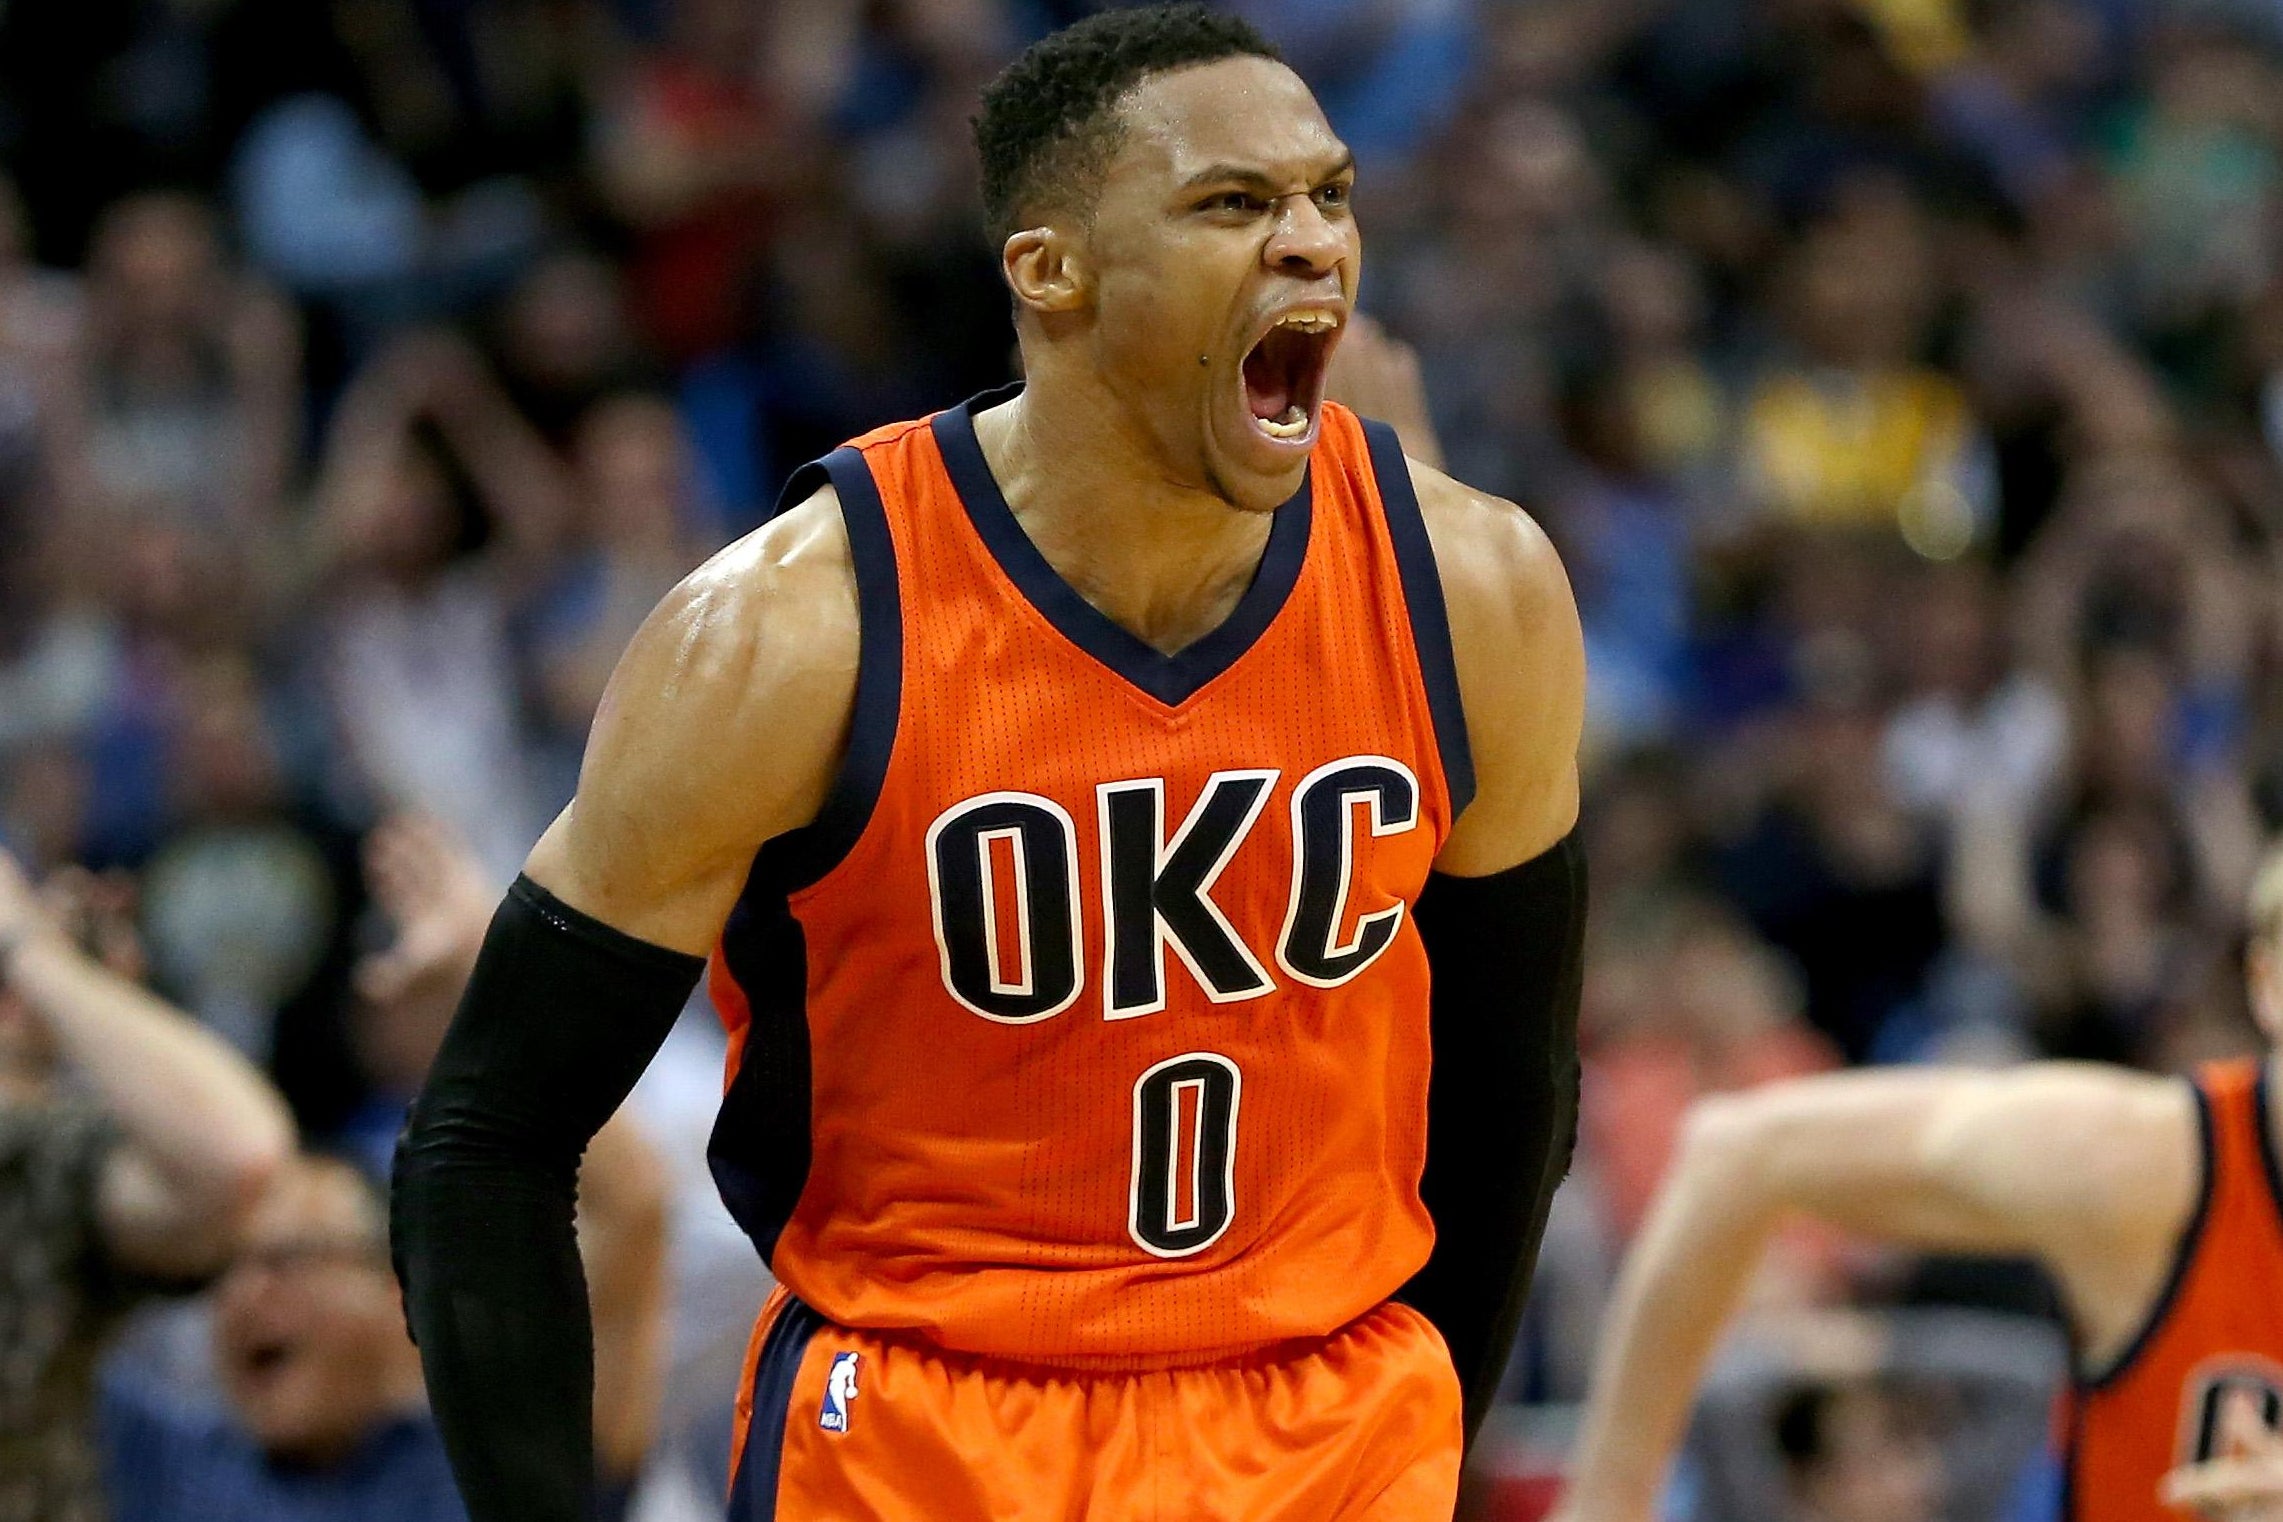 What were Russell Westbrook's stats in his MVP winning year?